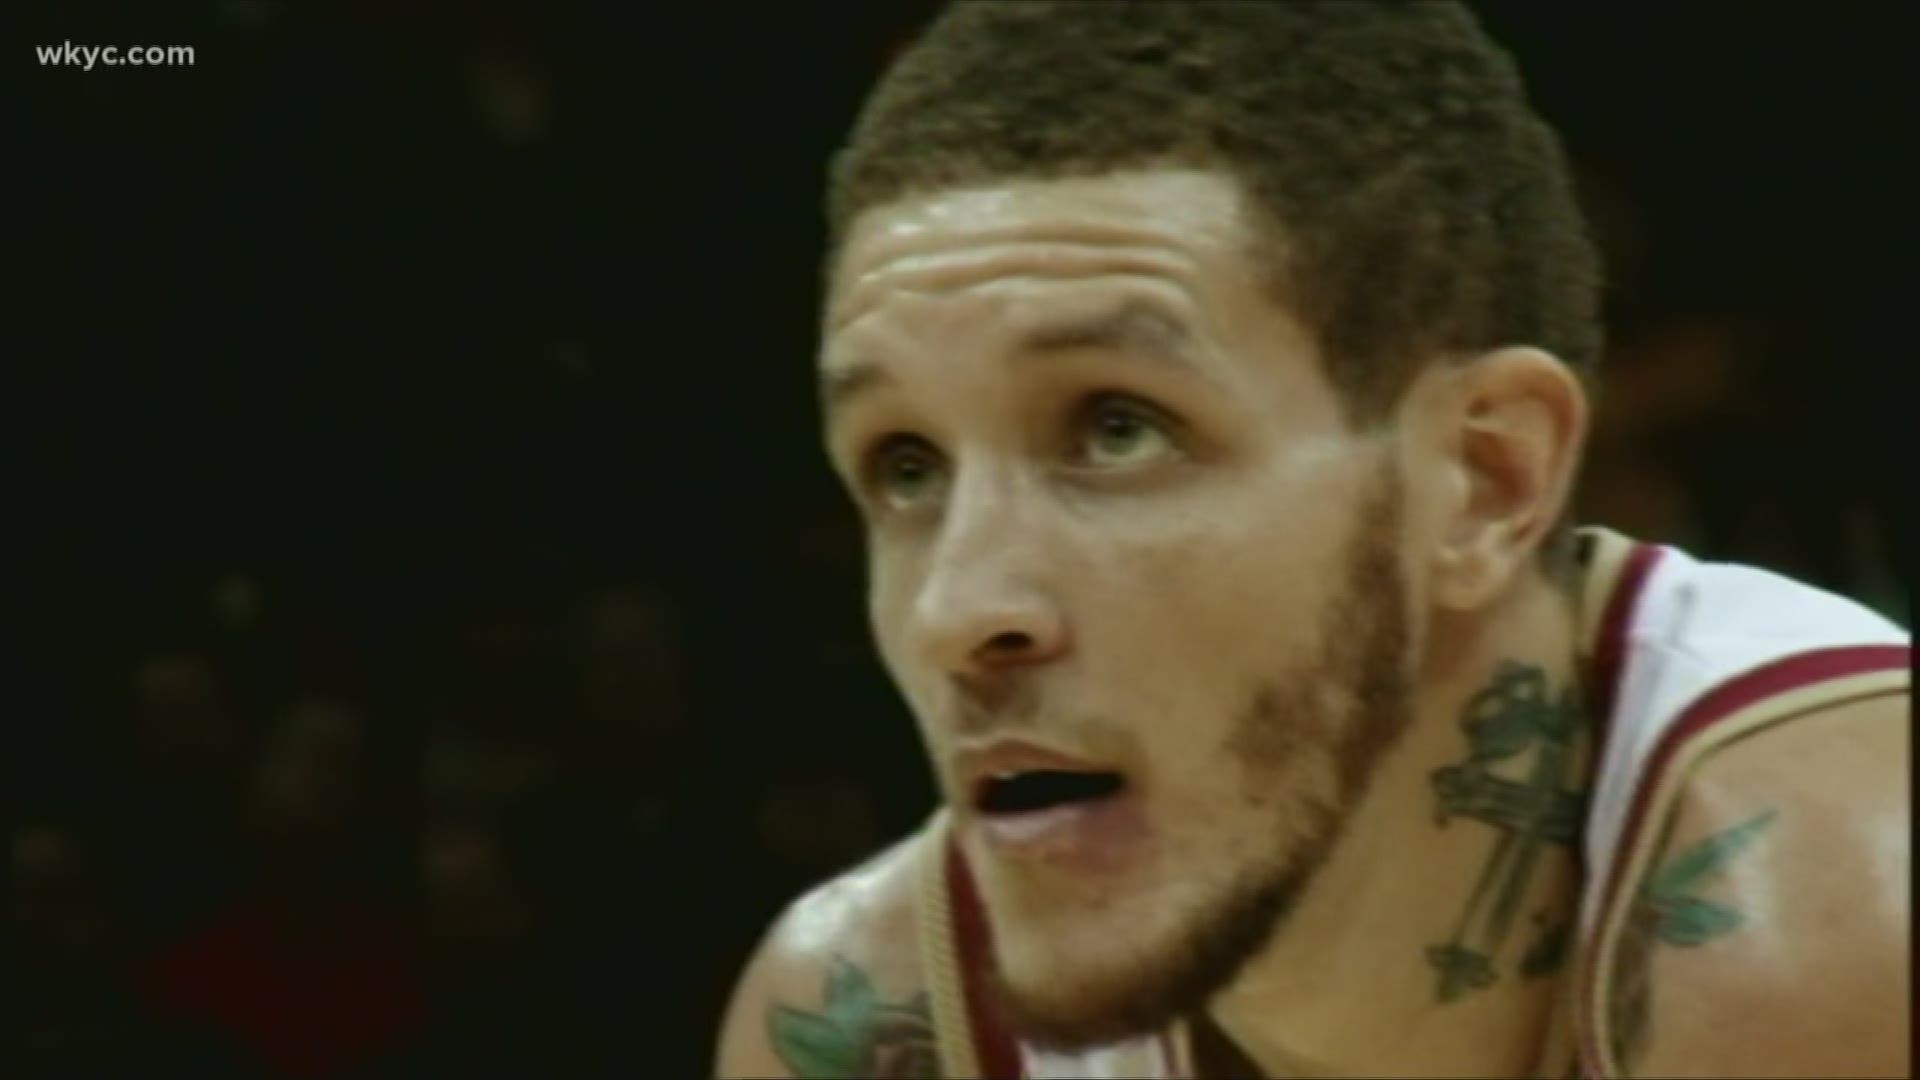 It's been eight years since Delonte West last played in the NBA.On Monday, a pair of disturbing viral videos proved to be cause for concern for many.